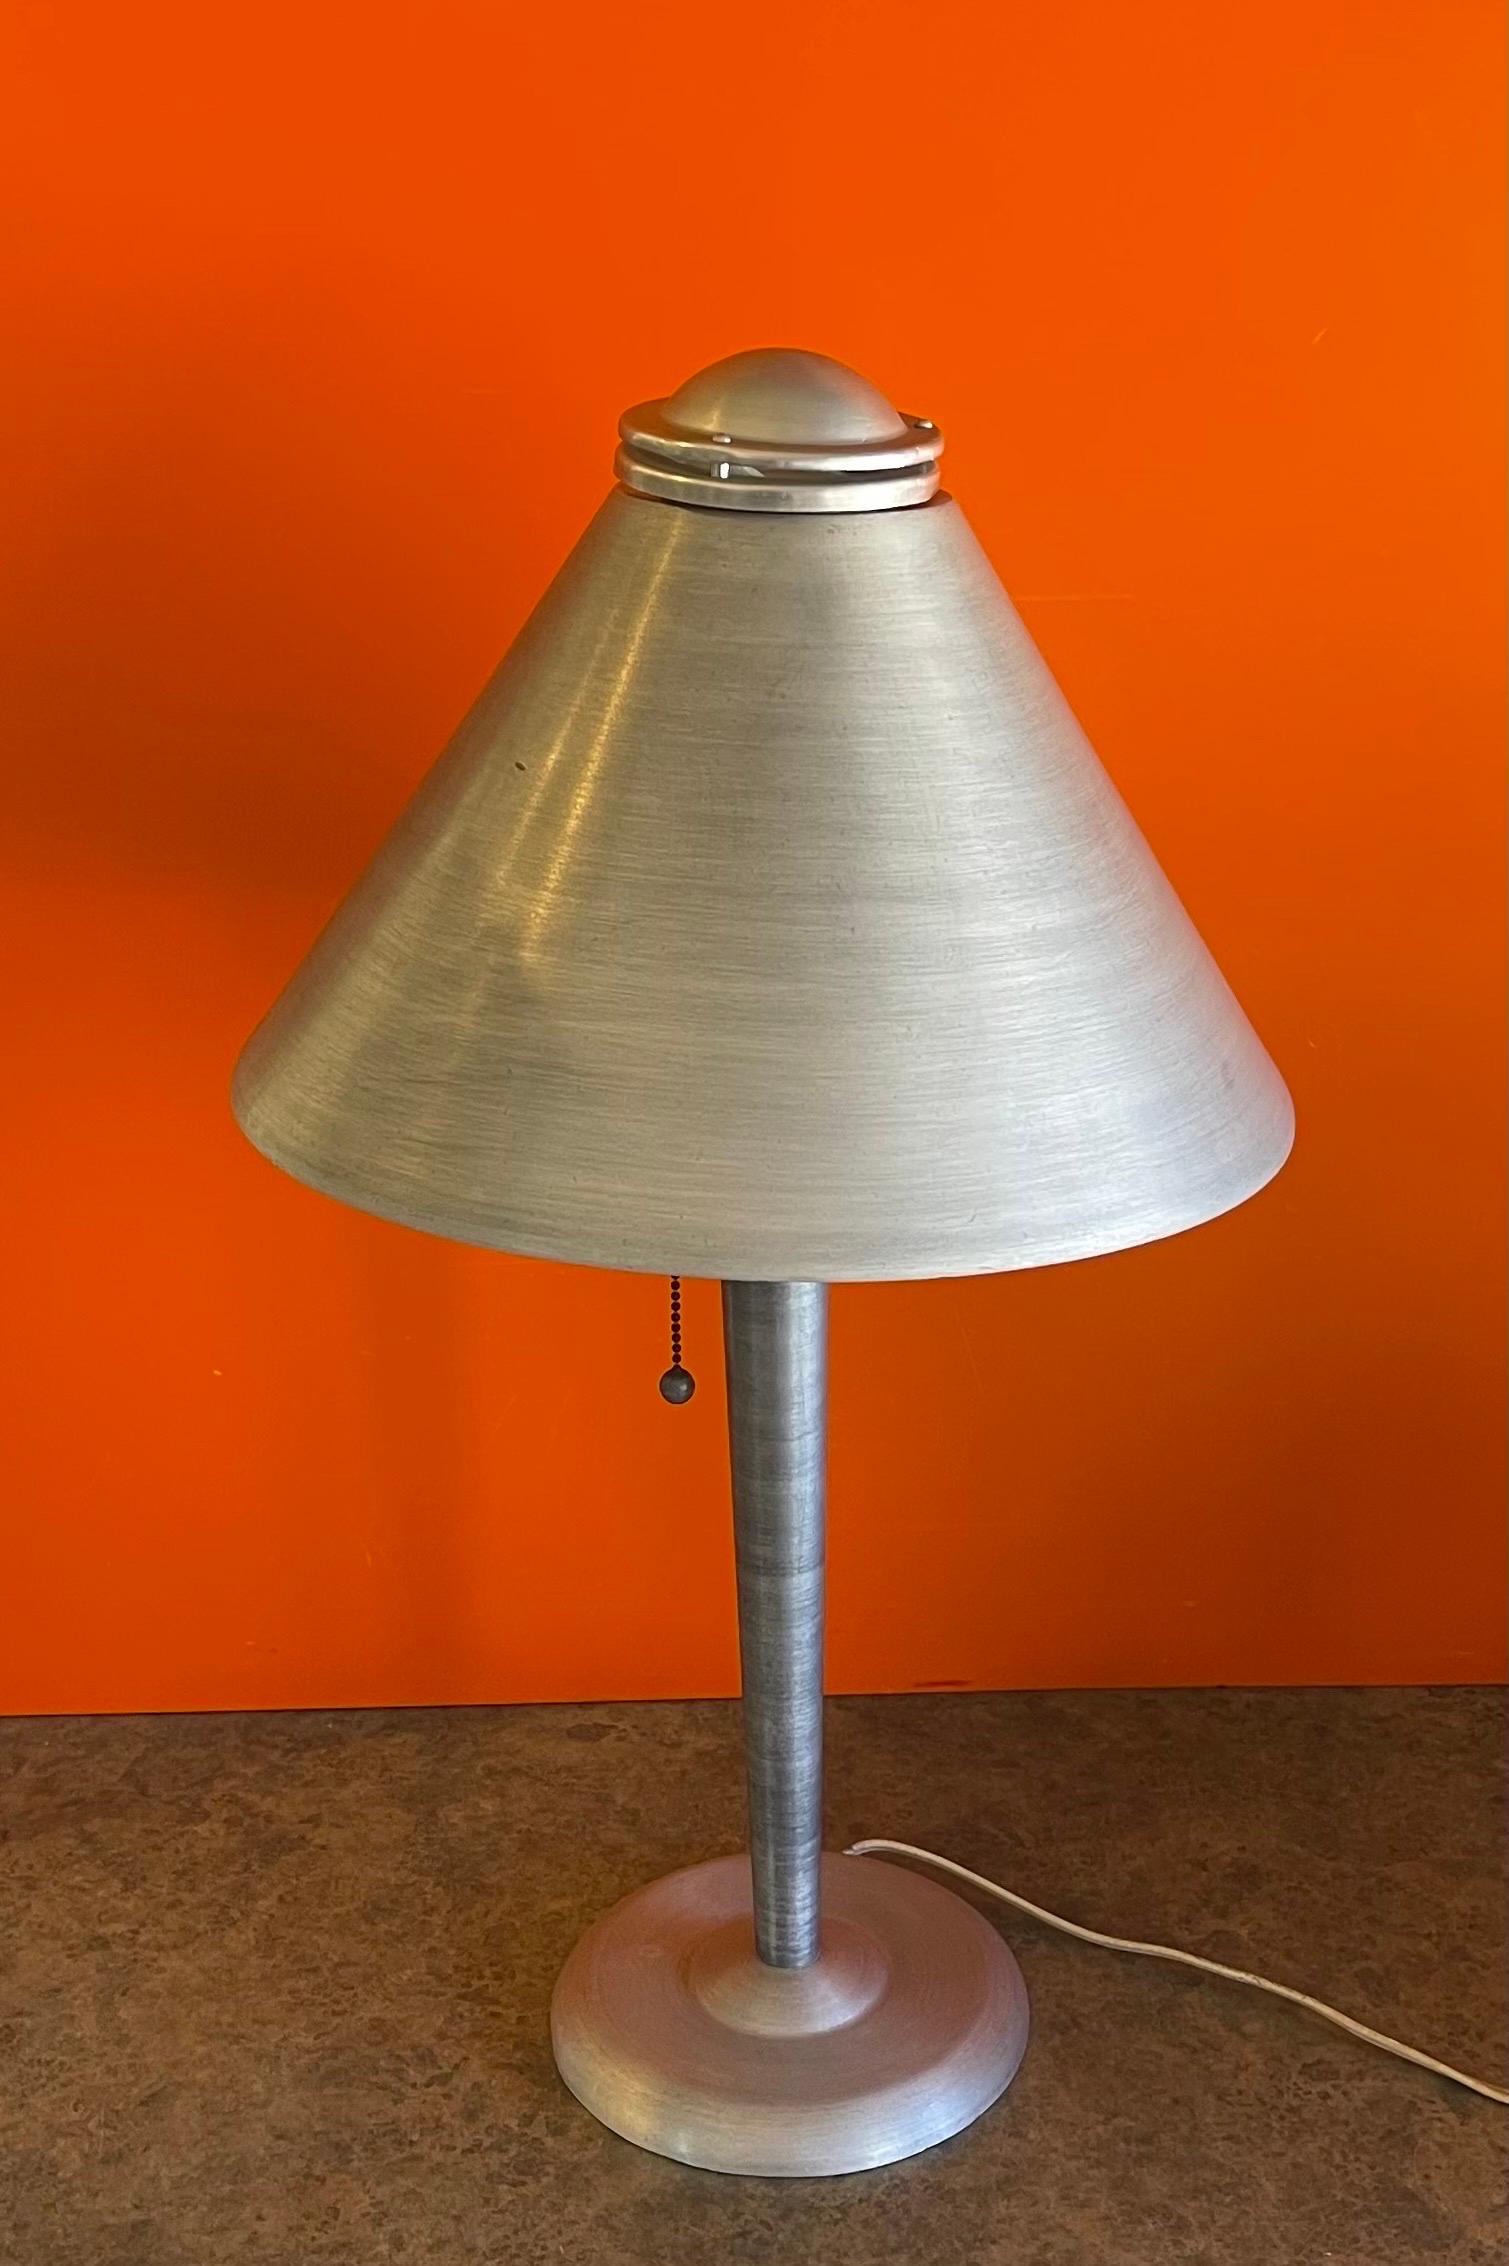 A very nice art deco / machine age brushed aluminum table lamp by Soundrite Corporation, circa 1930s. The lamp is in good vintage condition and measures 14